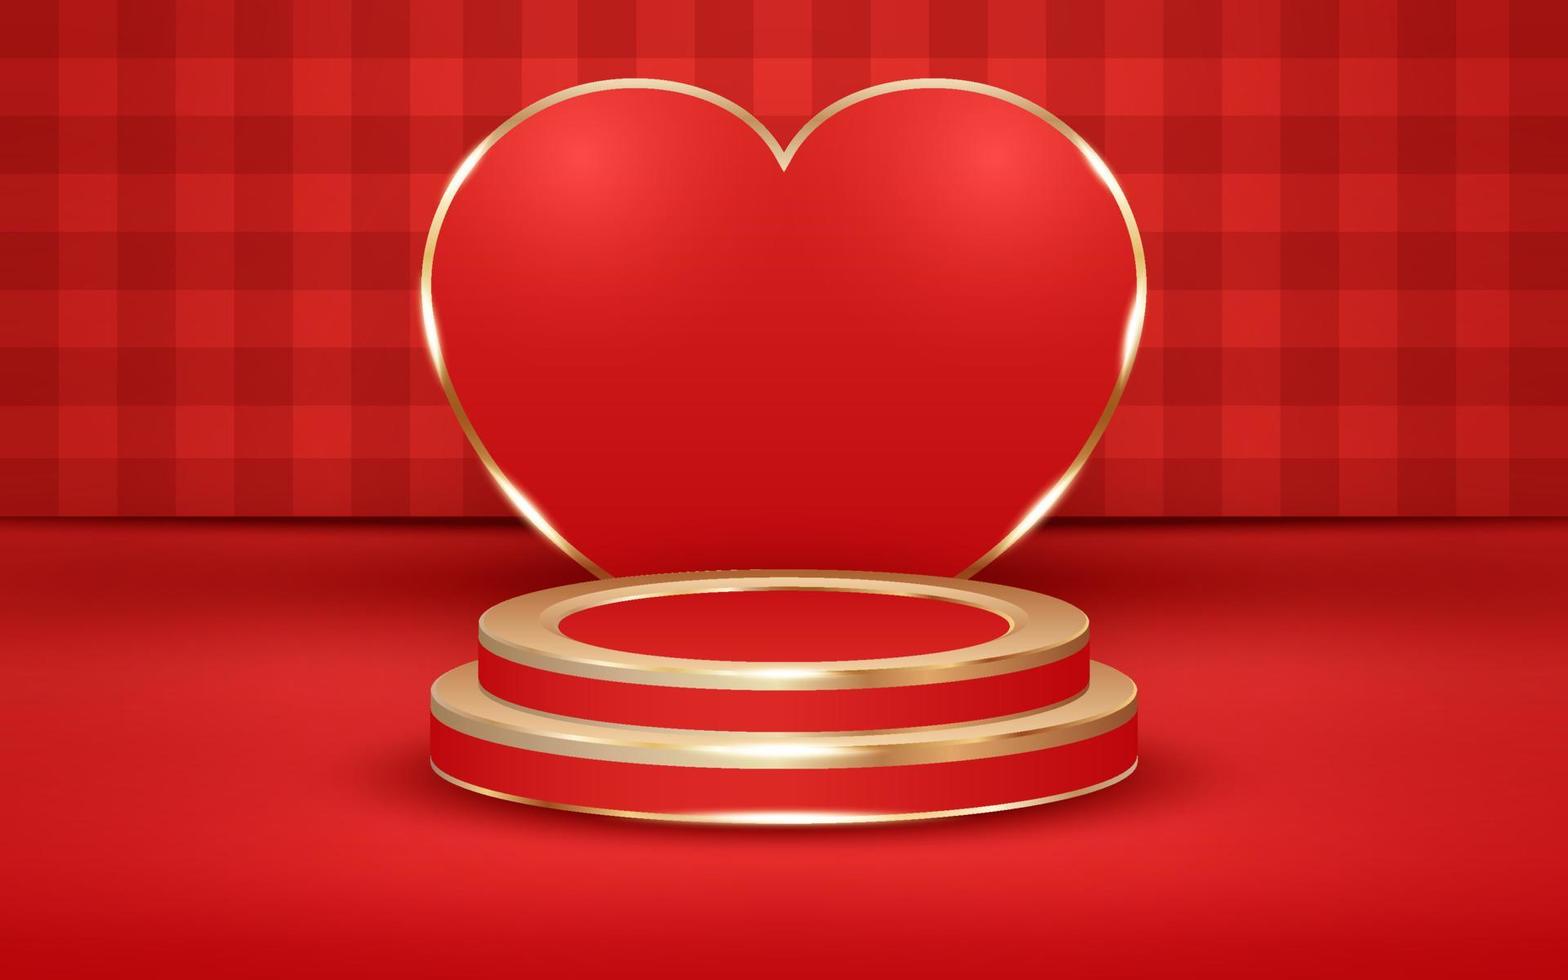 Red Checkered Valentine's Day Background with Podium and Golden Light vector